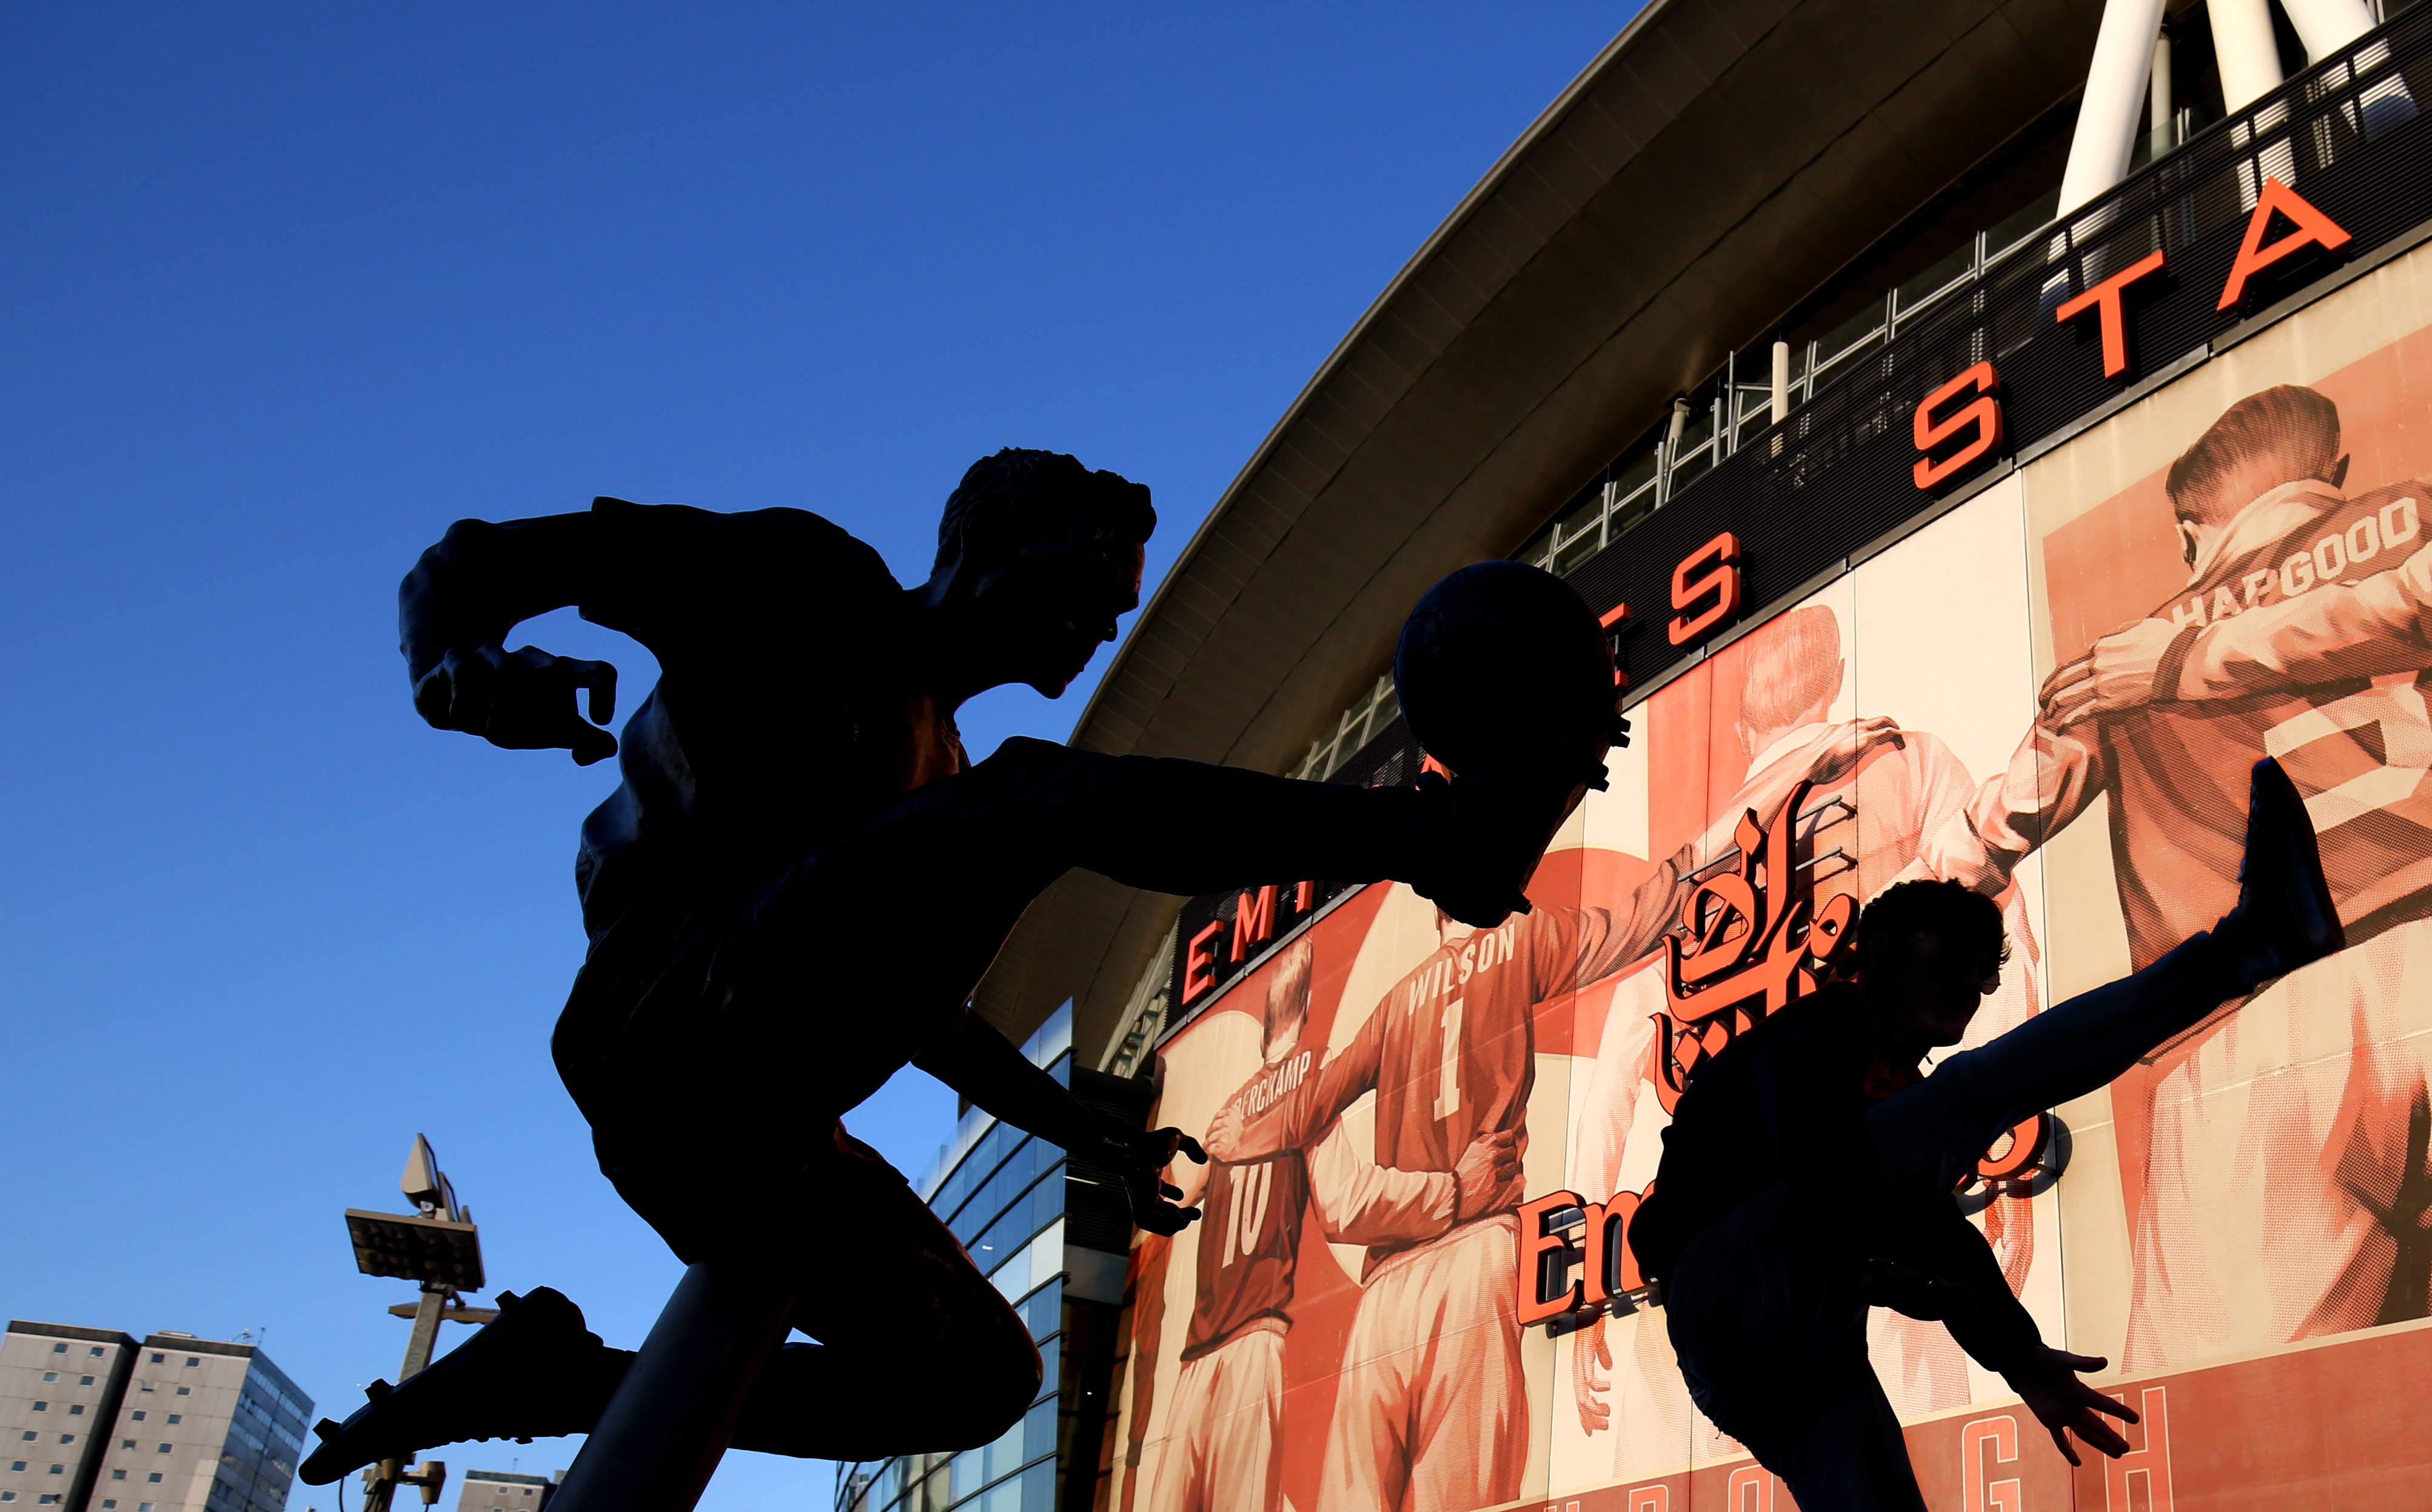 What impact does the current shutdown have on Arsenal’s finances?